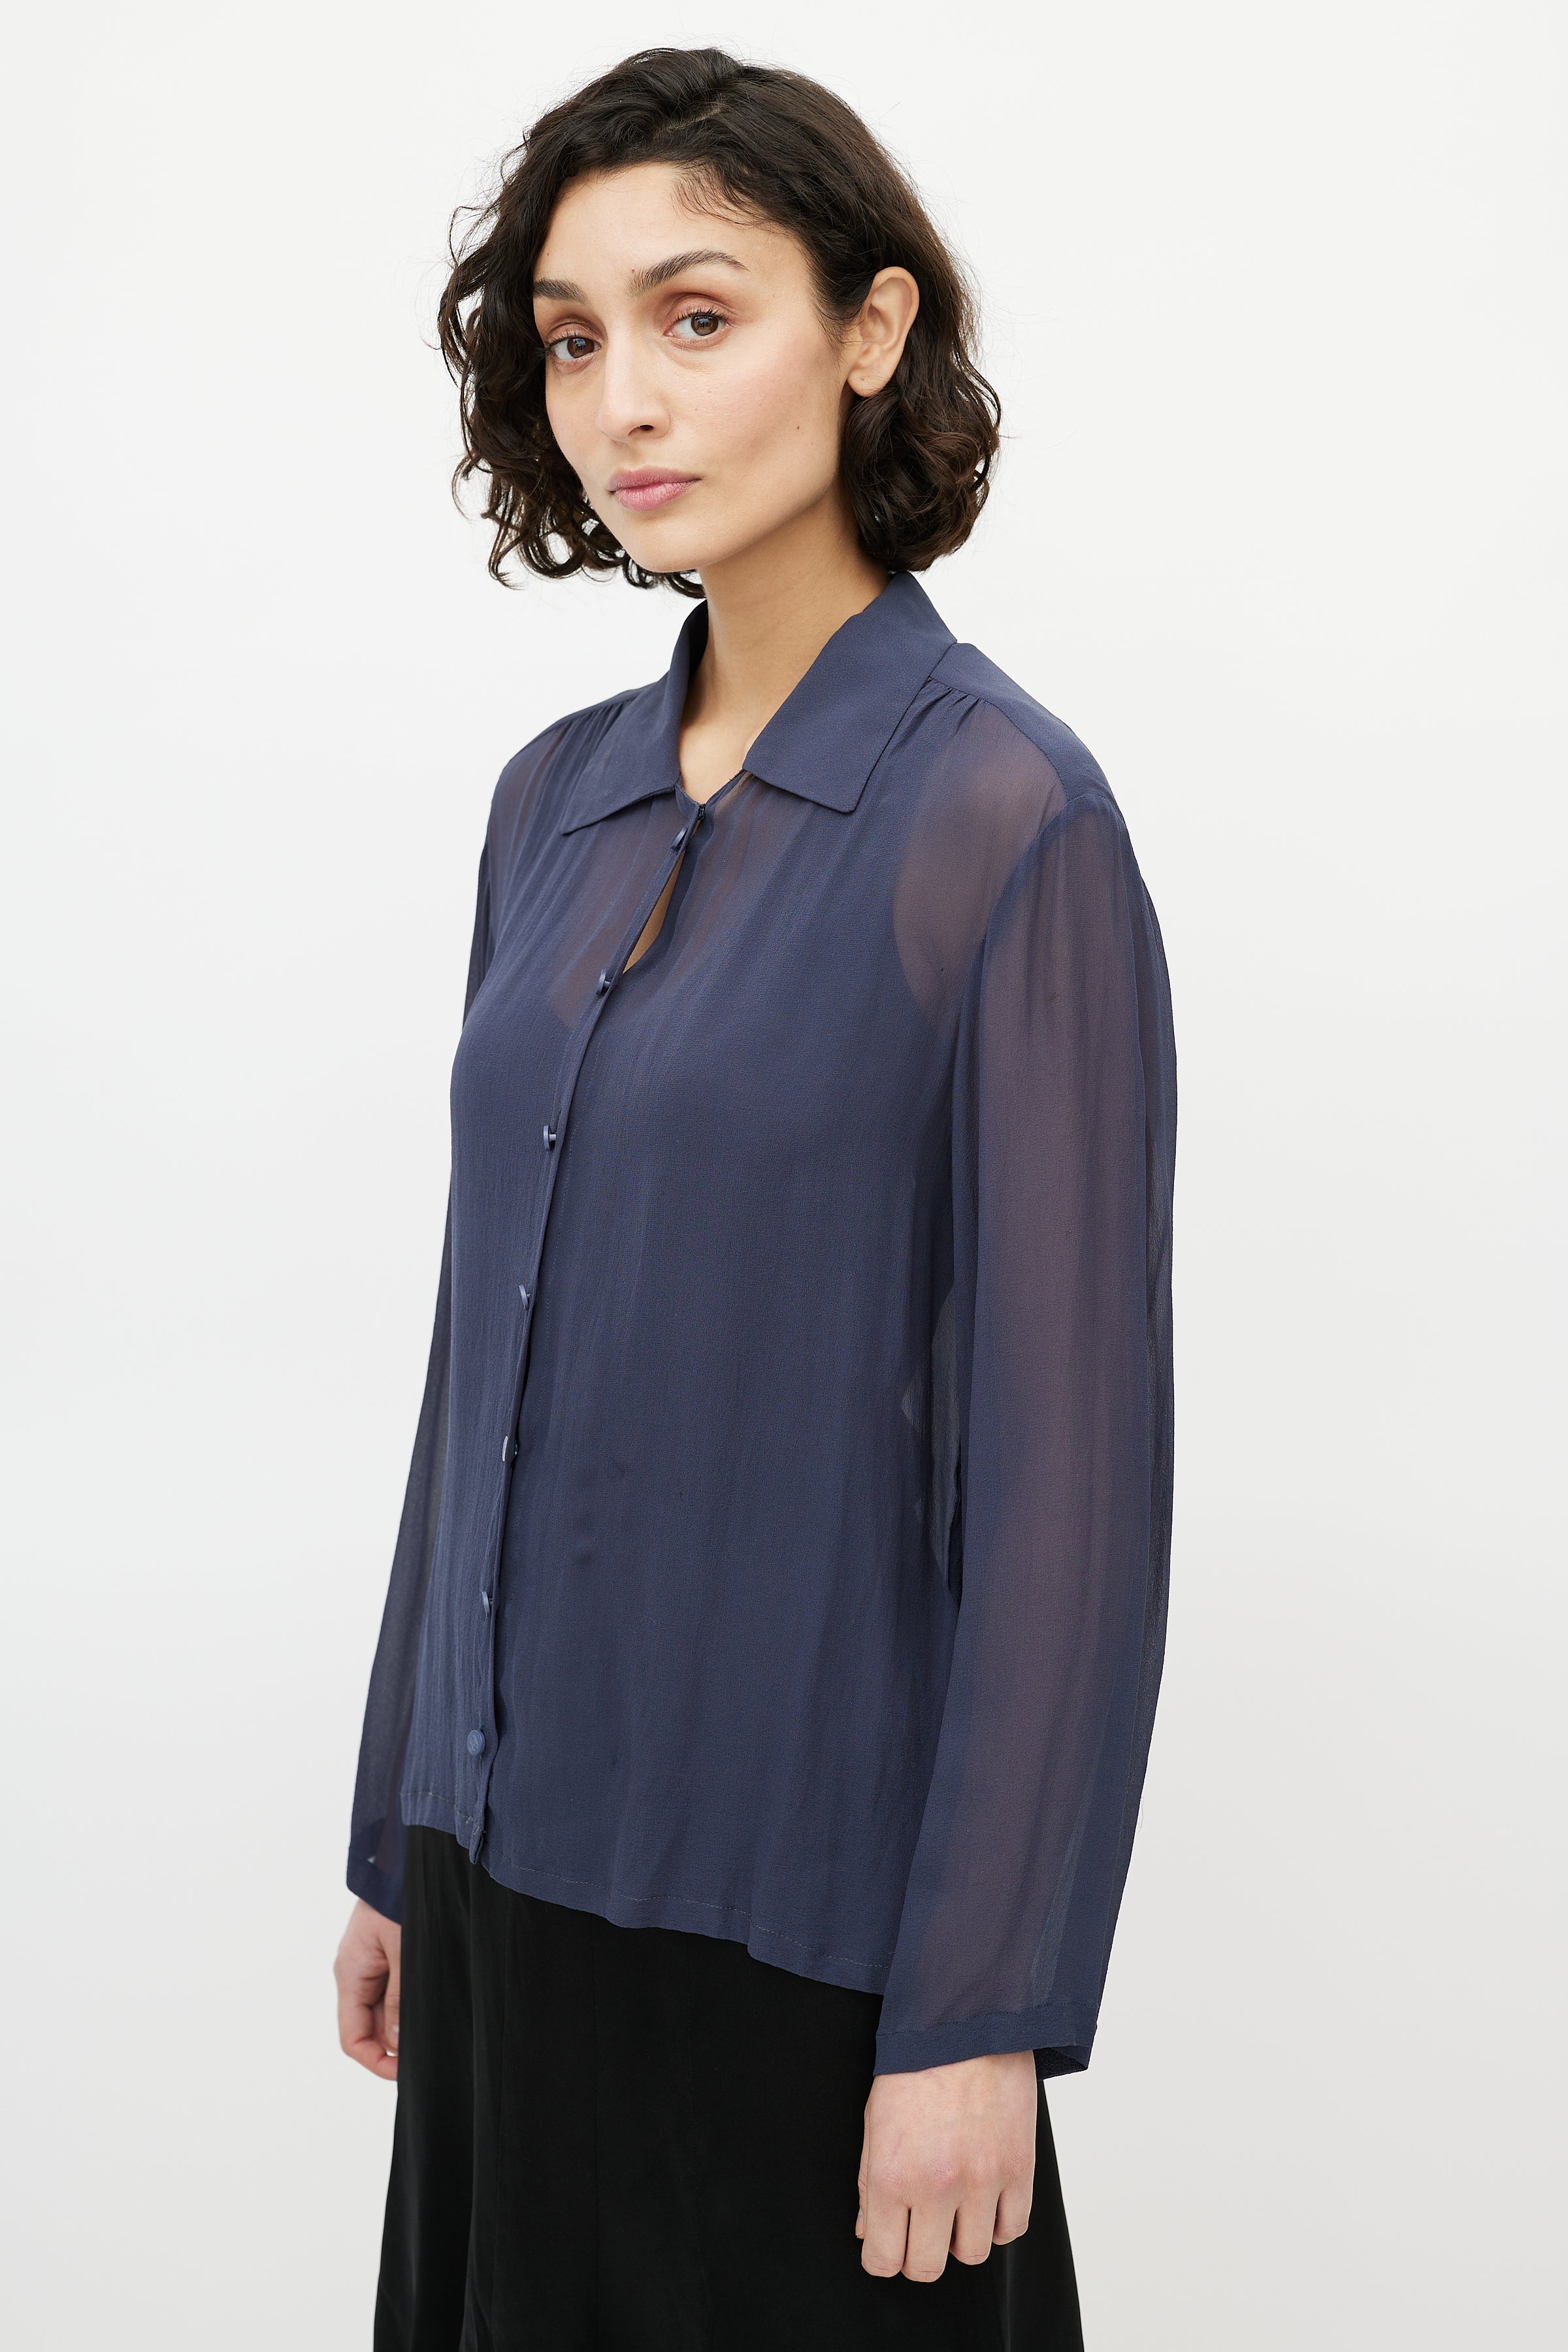 Chanel // Navy Blouse VSP Consignment – Sheer Scarf